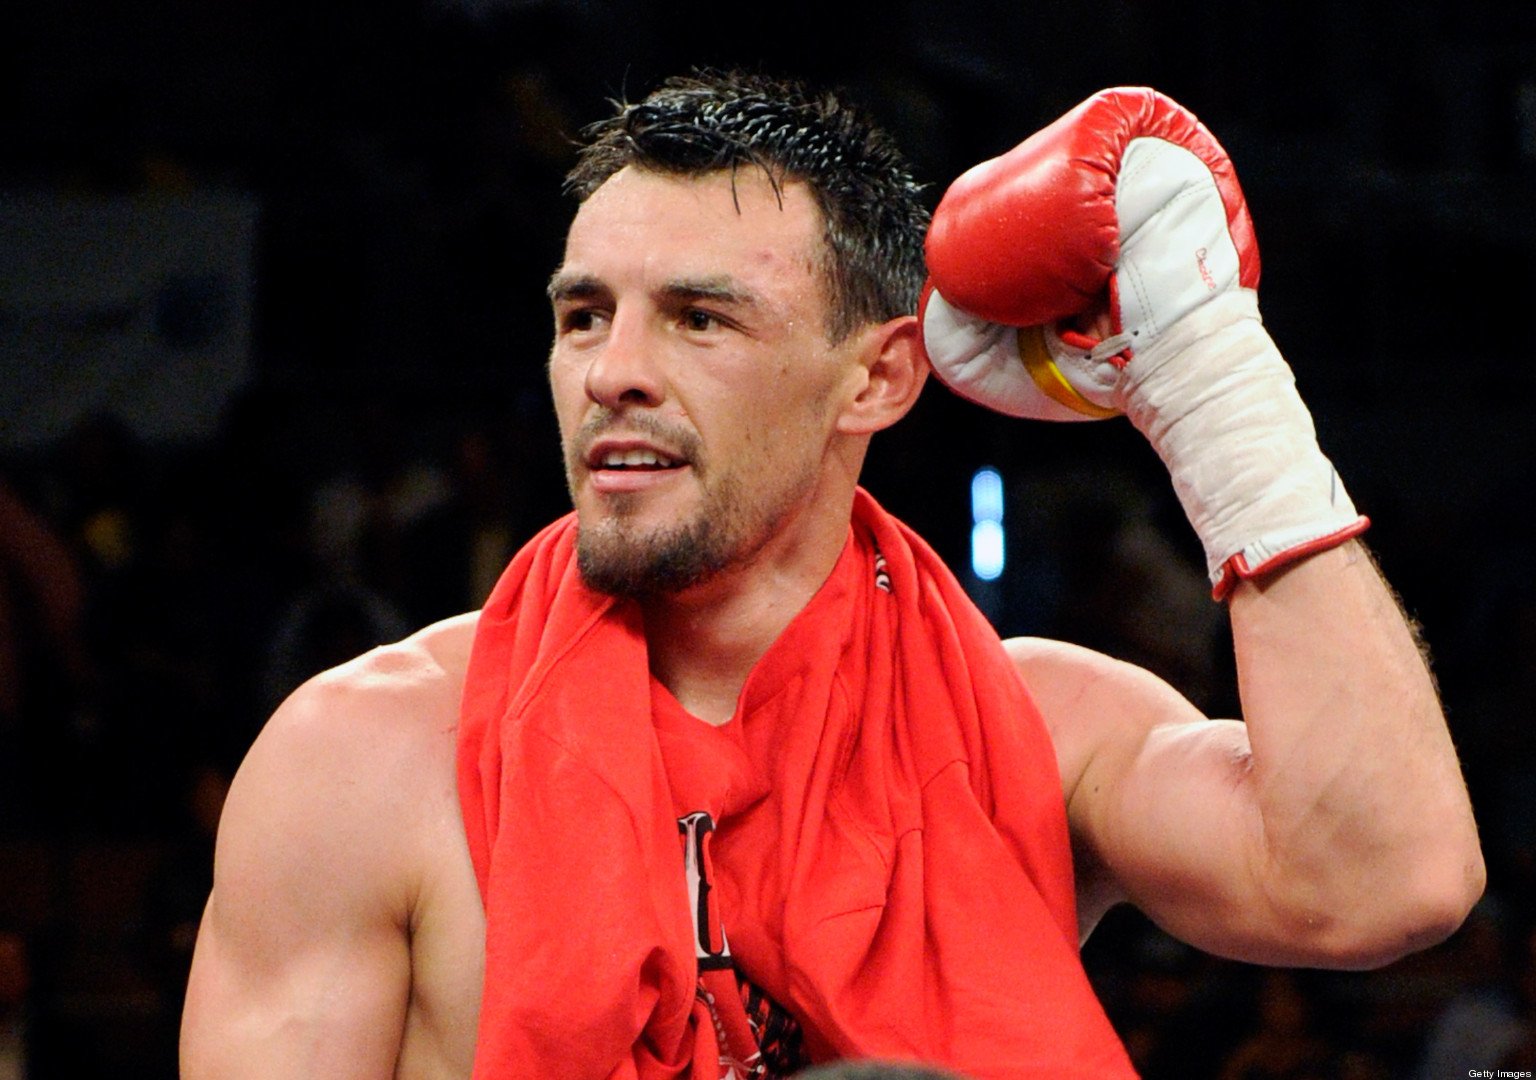 Robert Guerrero celebrates his unanimous-decision victory over Joel Casamayor in their junior welterweight fight at the Mandalay Bay Events Center July 31, 2010 in Las Vegas, Nevada. (Photo by Ethan Miller/Getty Images)